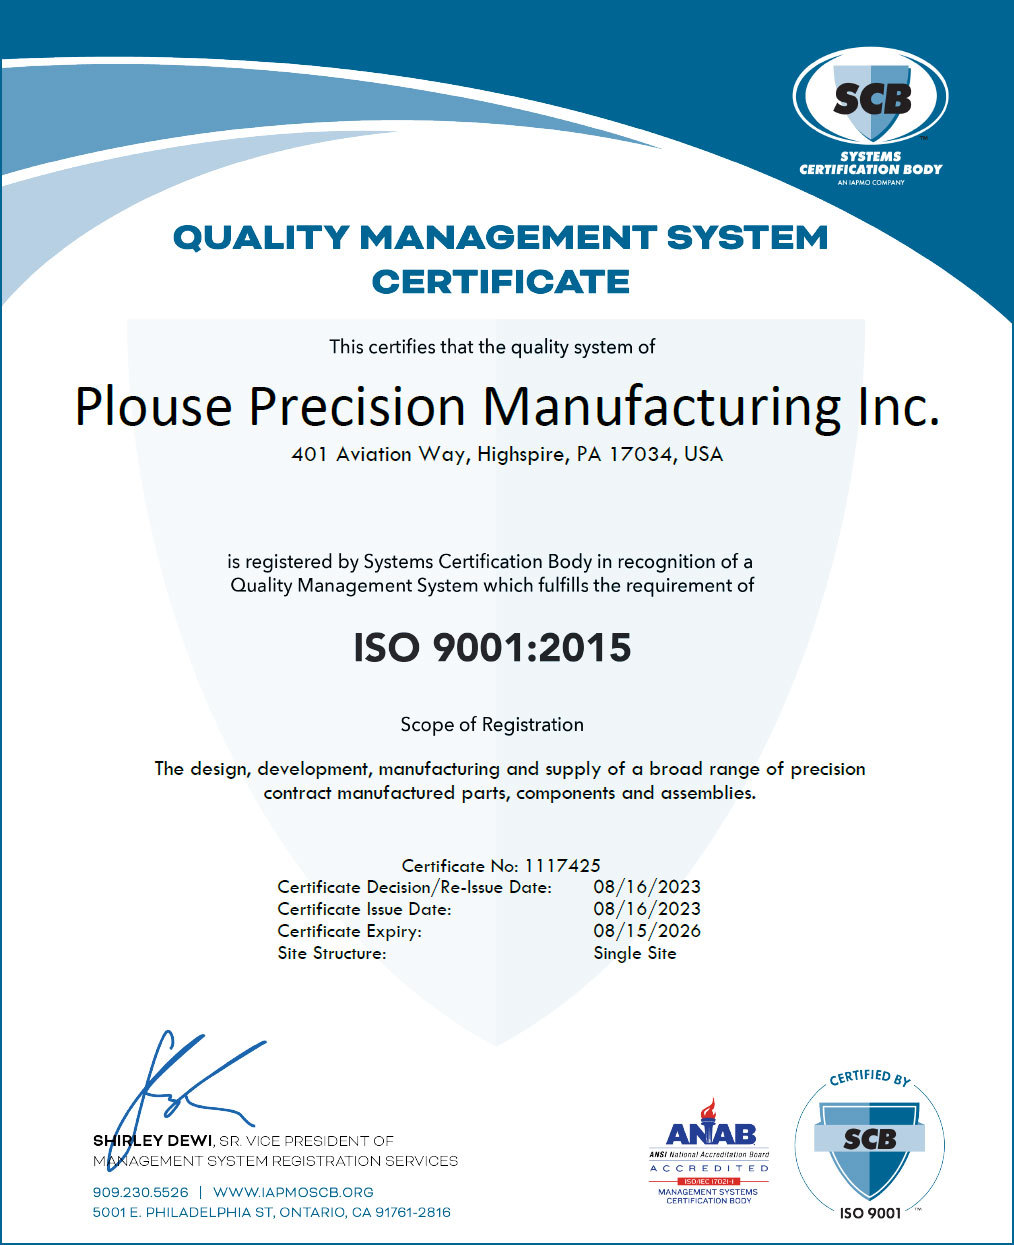 Quality Management System Certificate for Plouse Precision Manufacturing